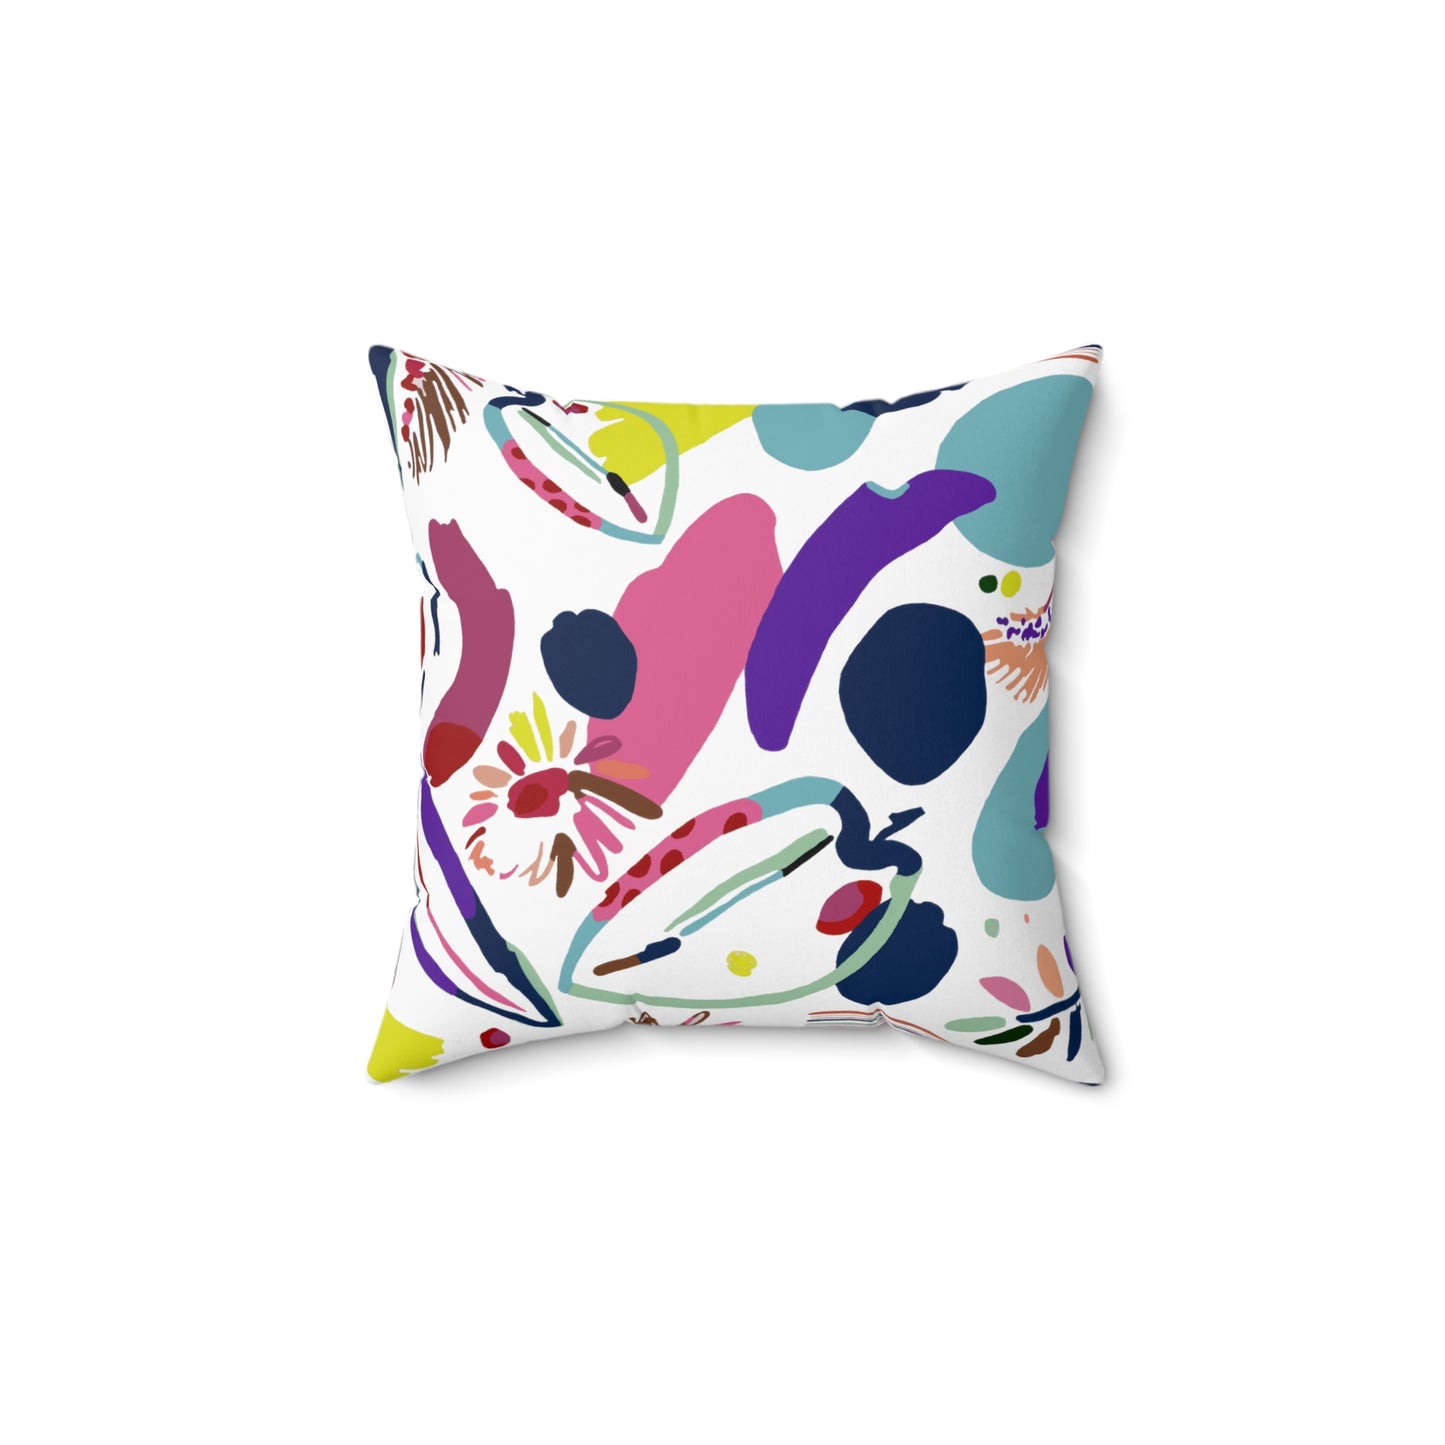 Spun Polyester Square Pillow with Zipper - Abstract Design